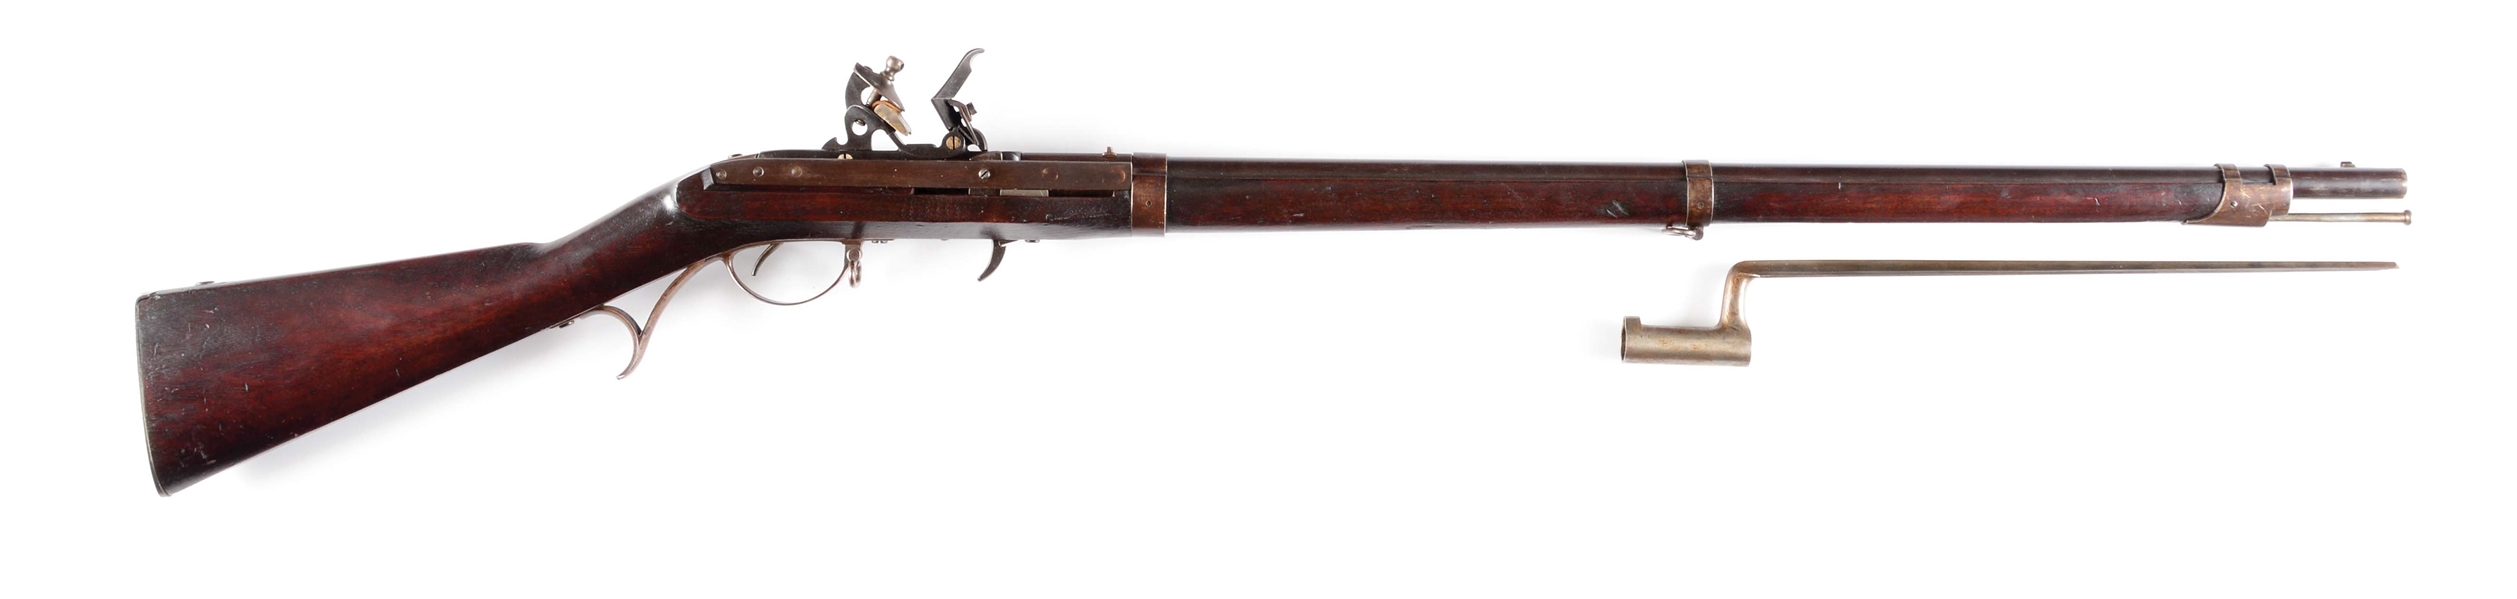 (A) HIGH CONDITION 1838 DATED US M1819 FLINTLOCK RIFLE BY HARPERS FERRY WITH CORRECT BAYONET.